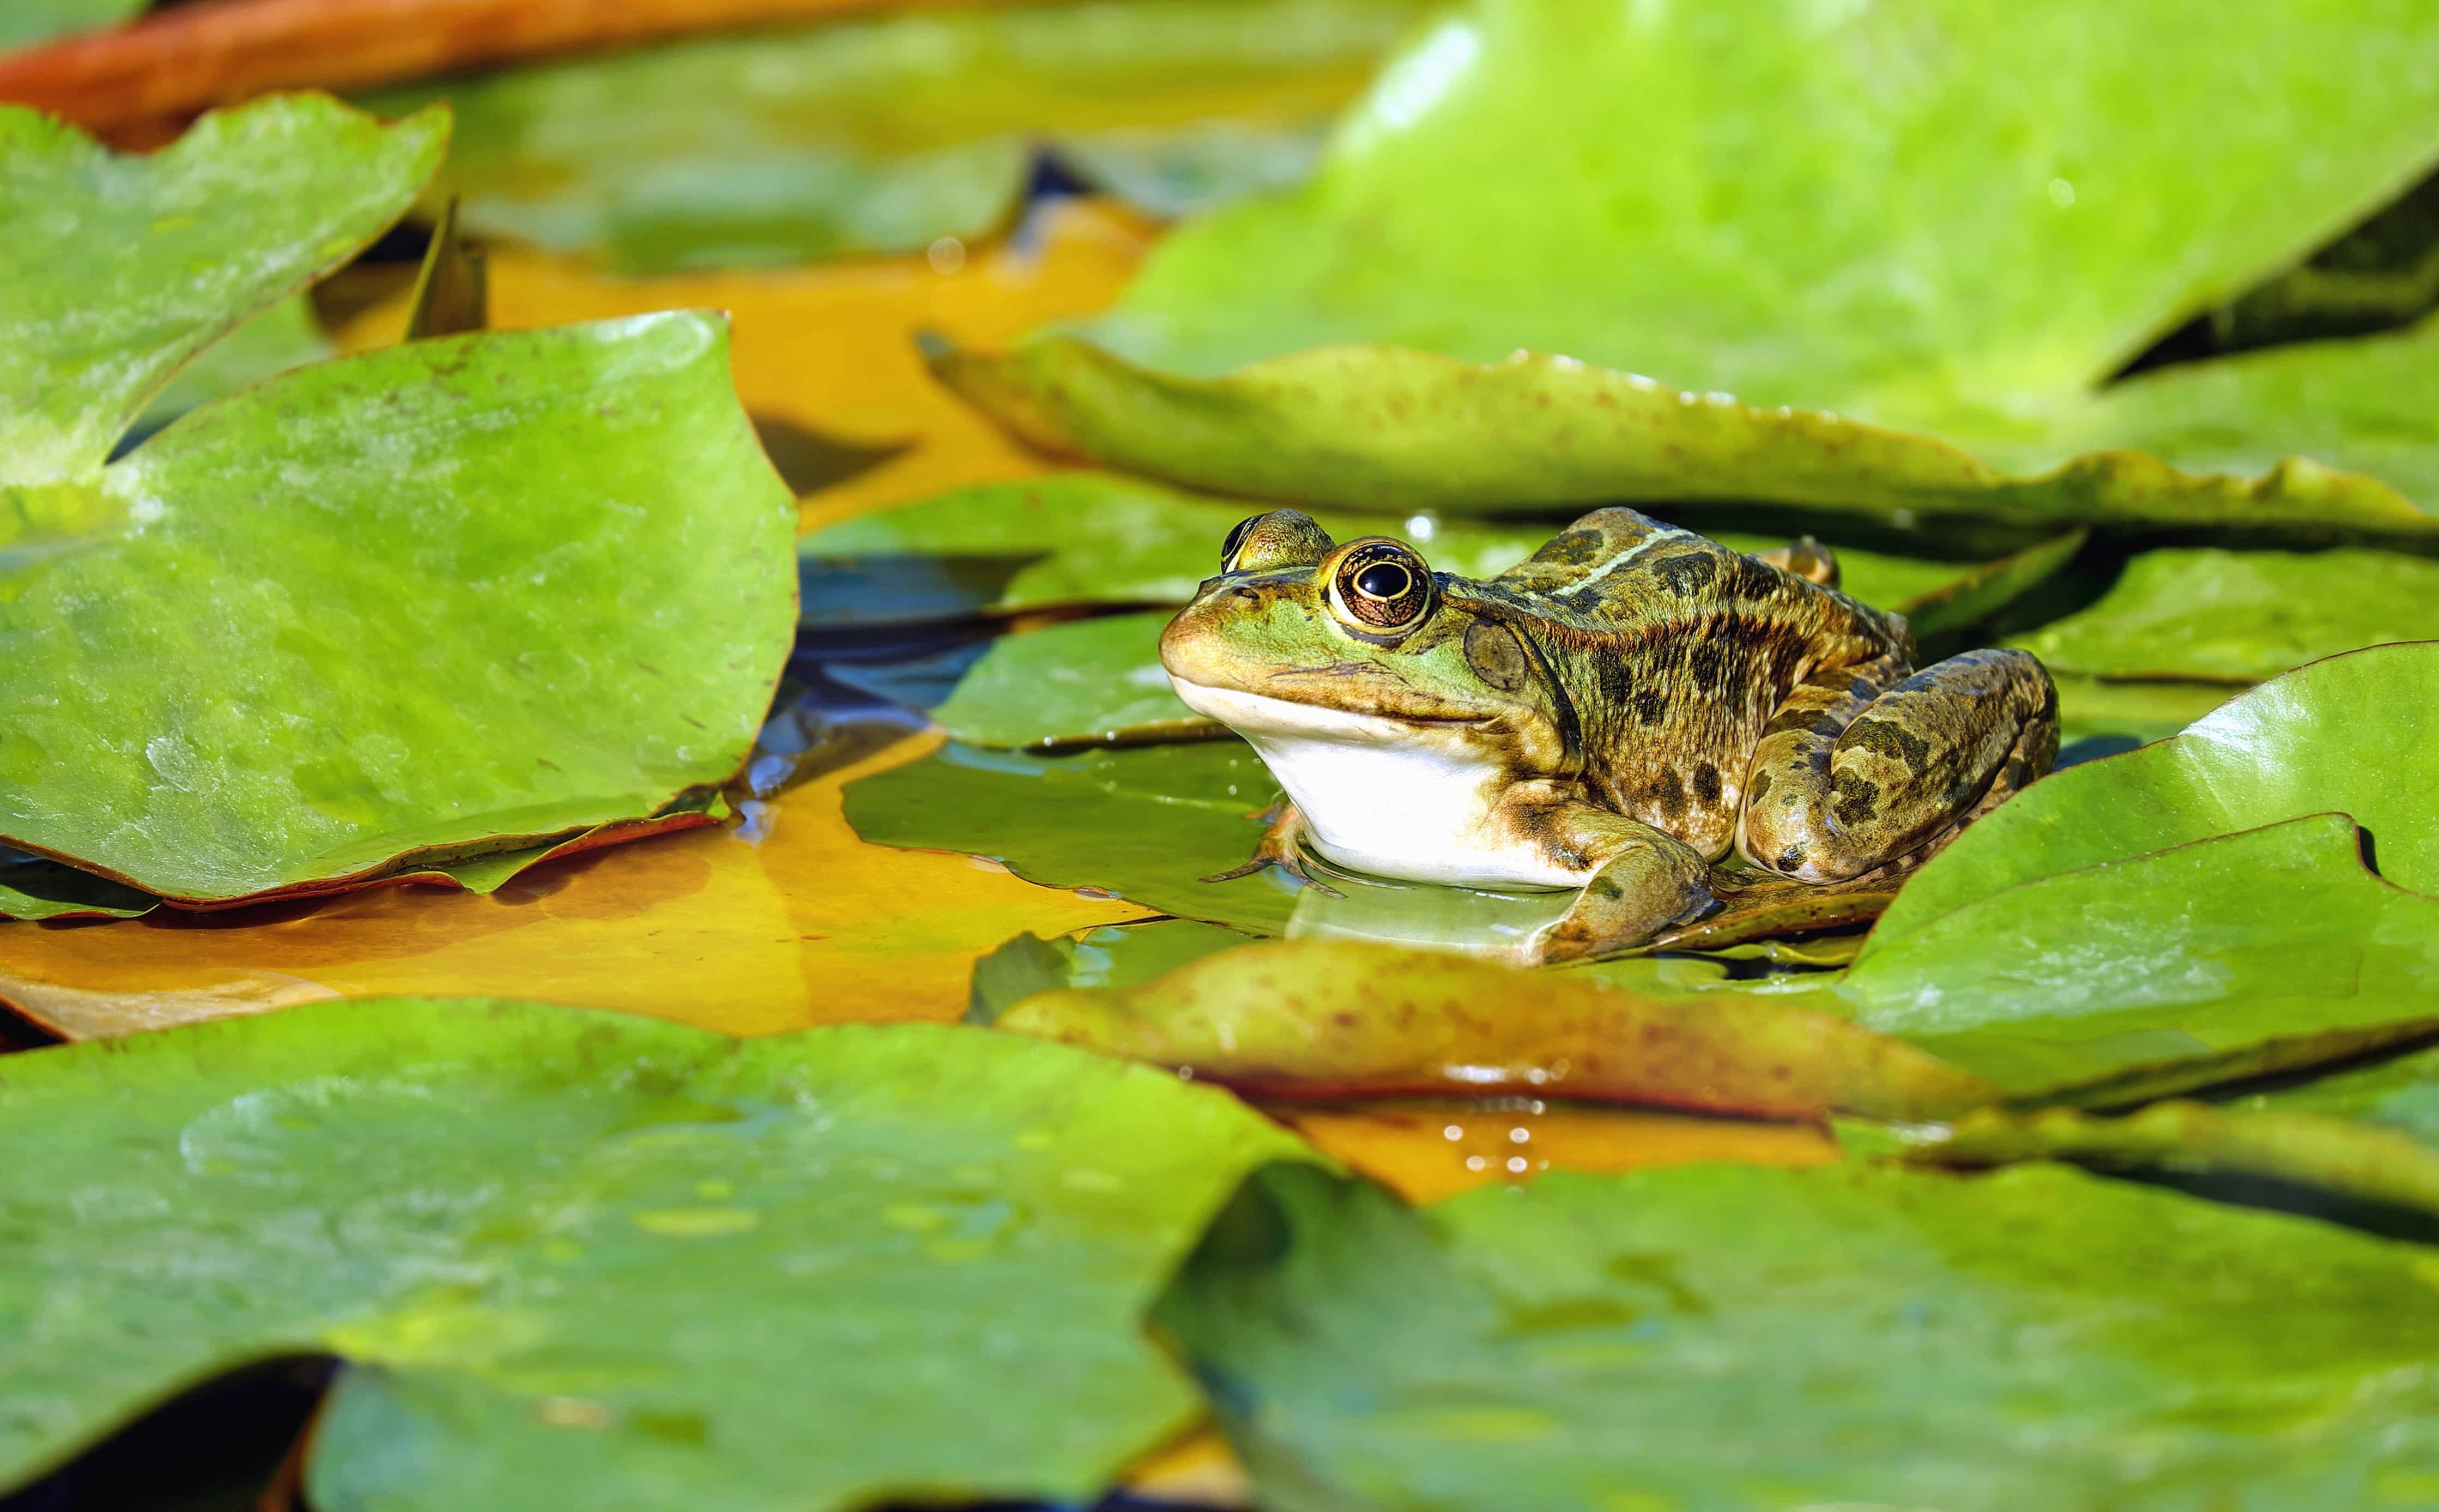 Free picture: water, frog, leaf, nature, green leaves, amphibian